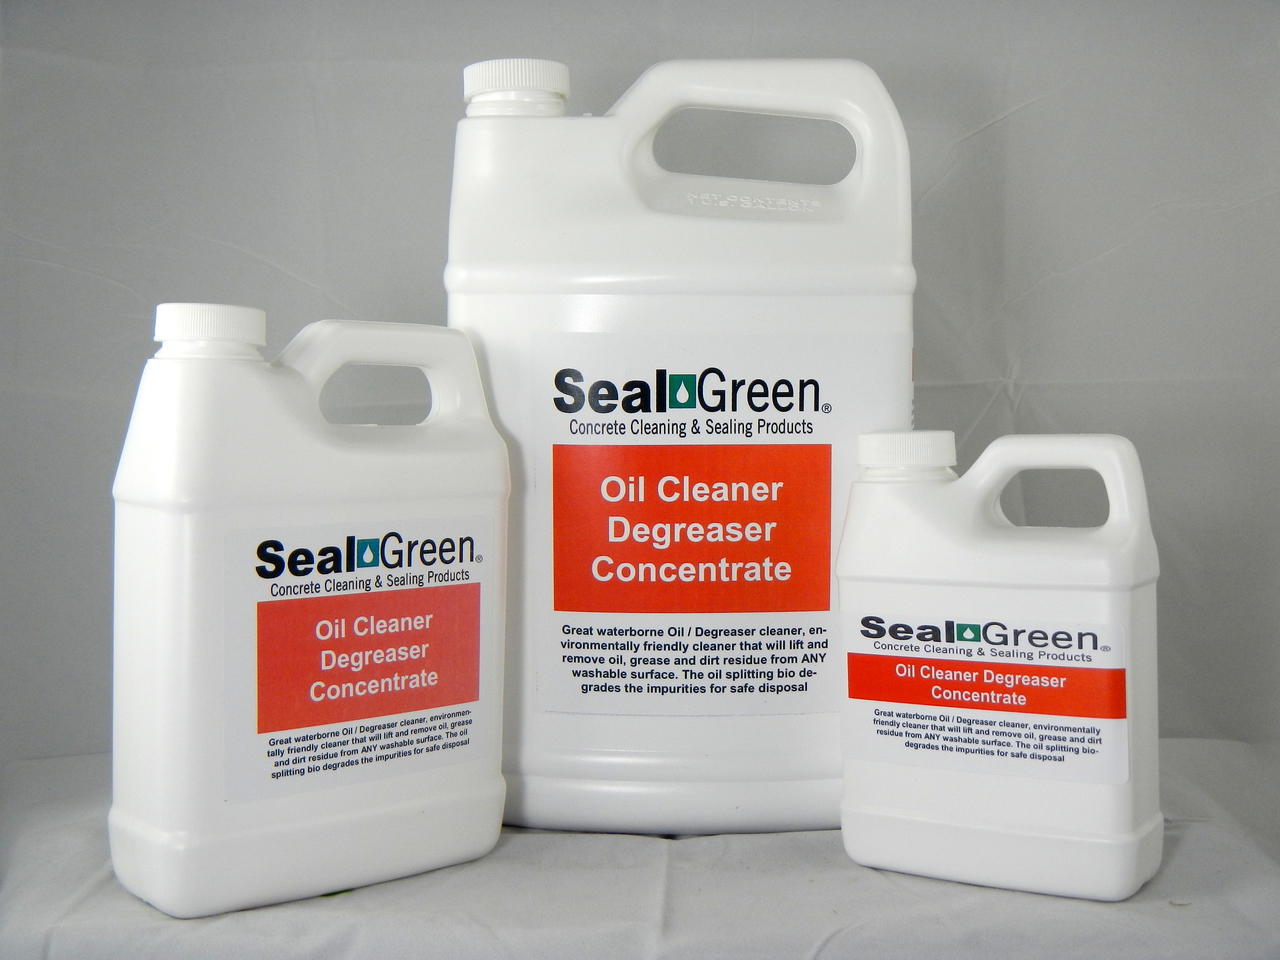 Question: Would your SealGreen Oil Cleaner Degreaser Concentrate also be appropriate for cleaning what looks to be an oily/gr